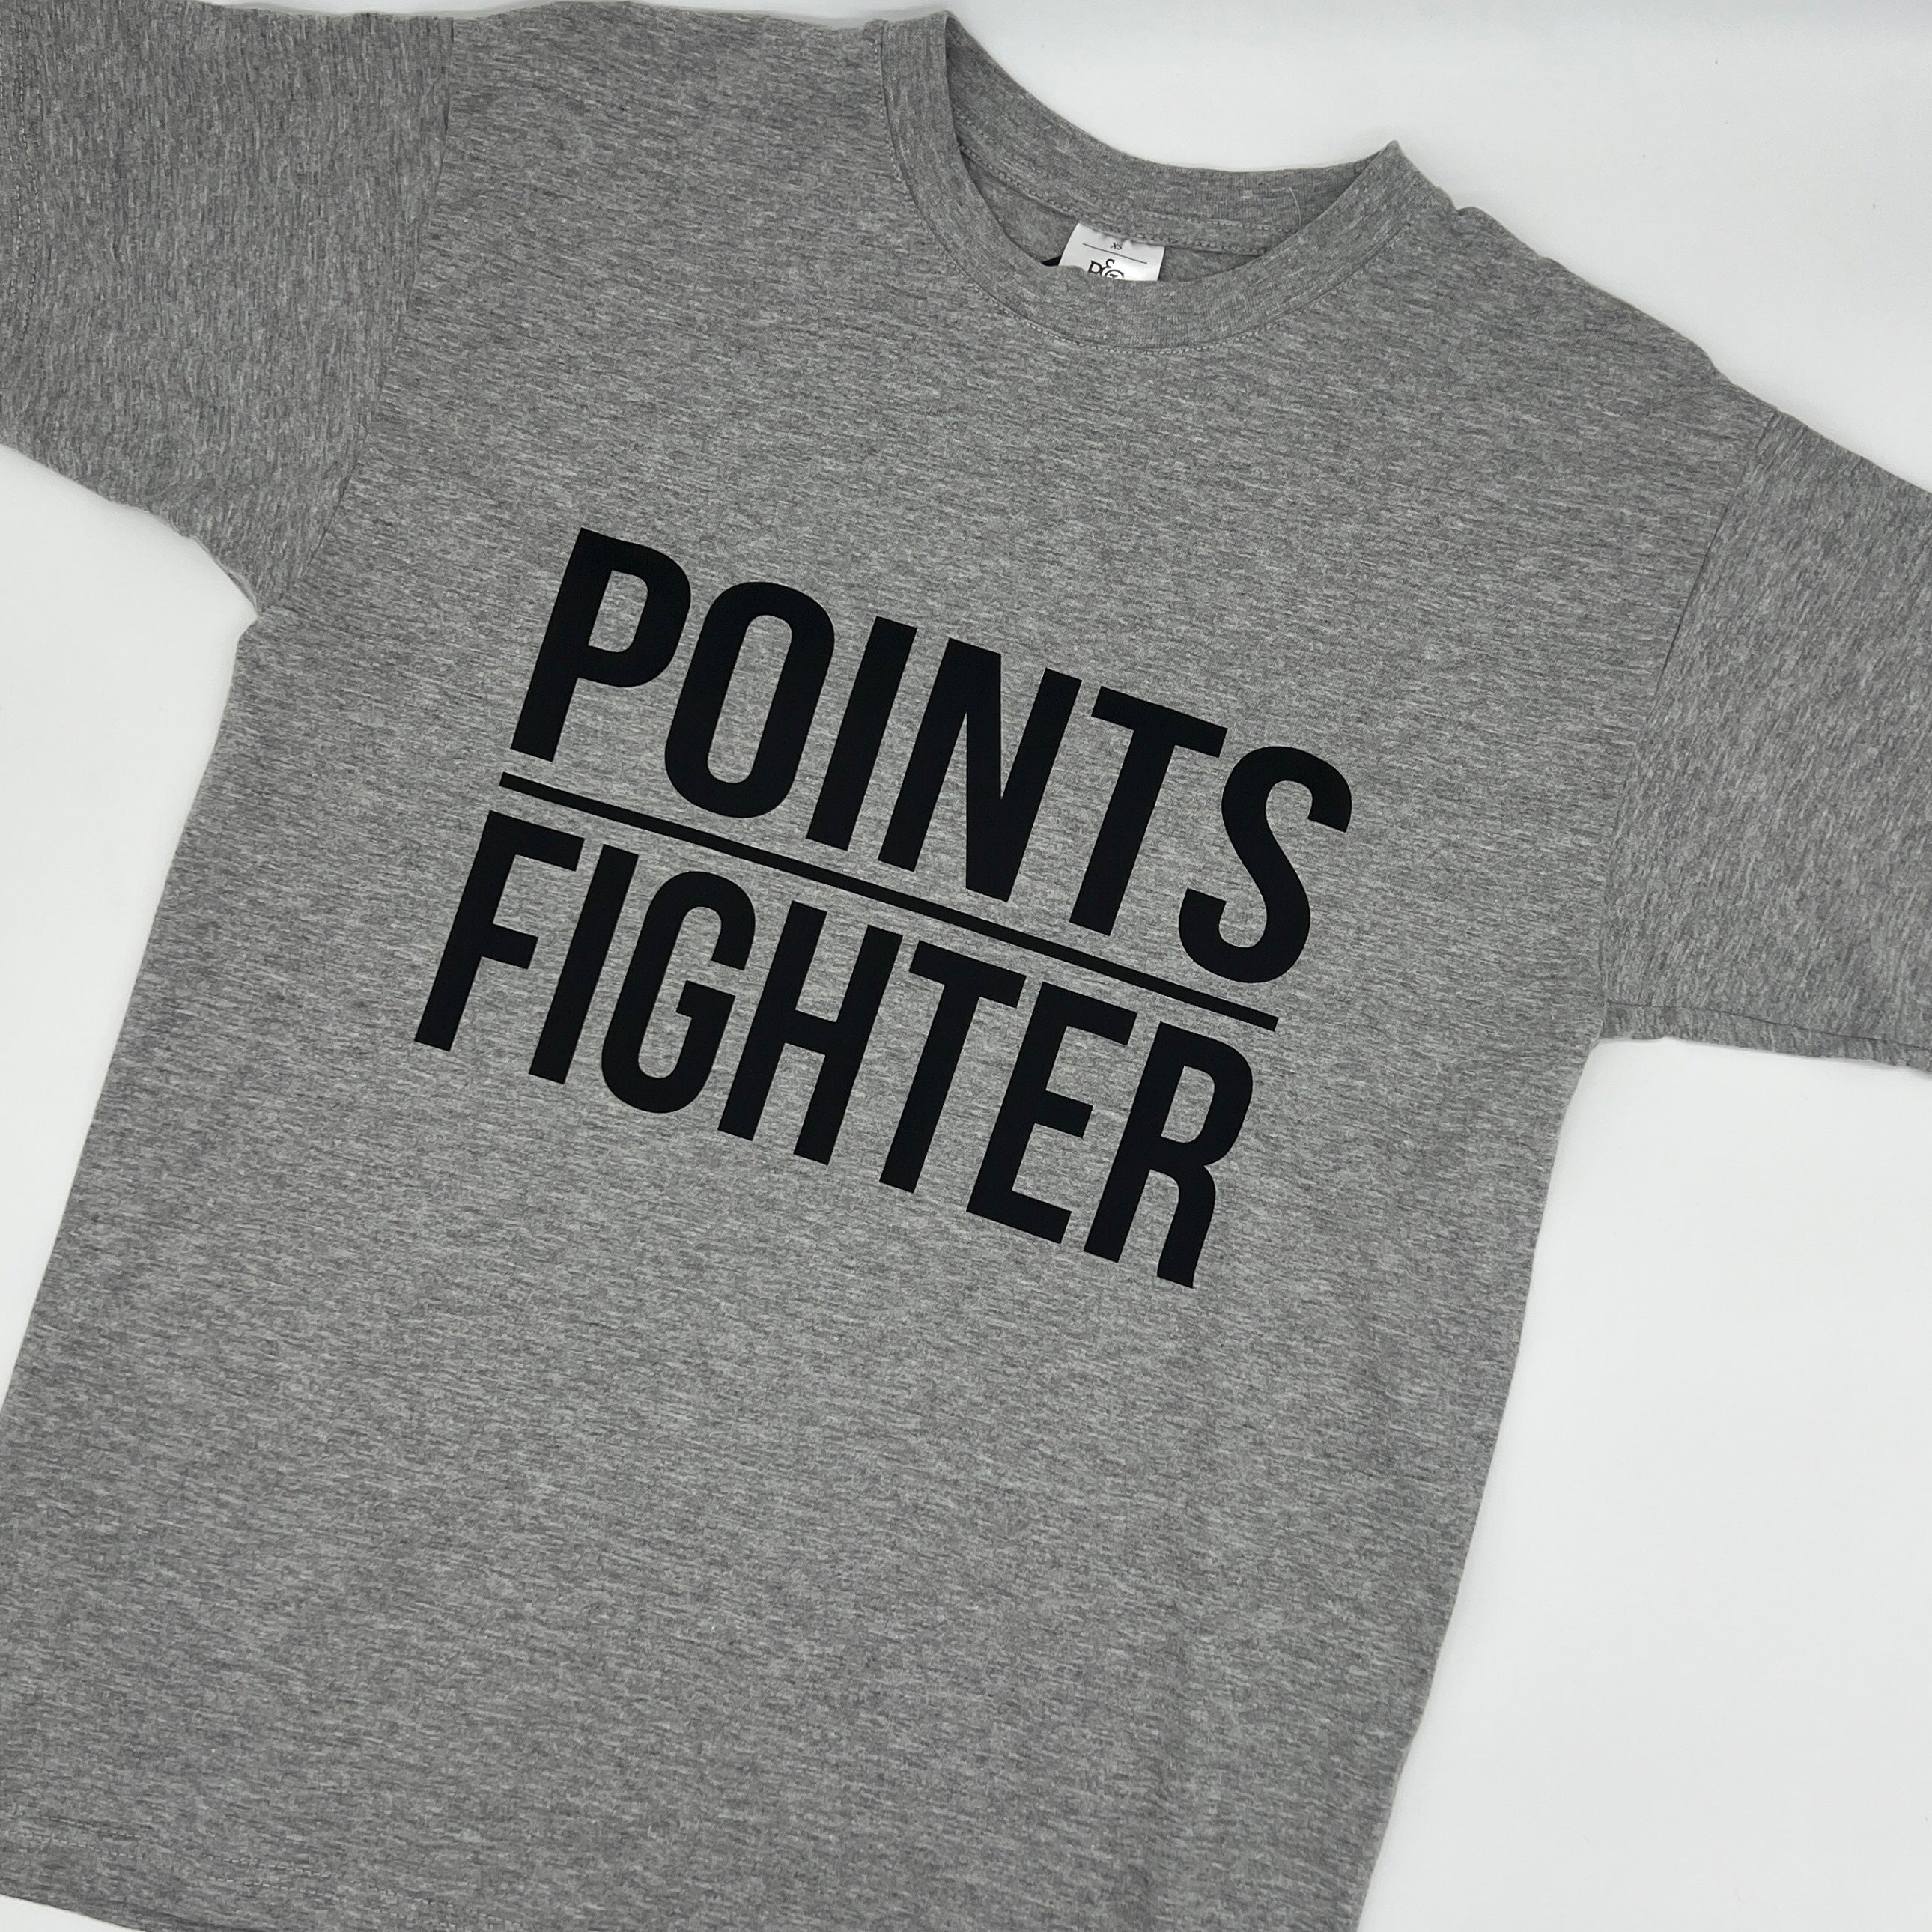 Points Fighter T-Shirt - Grey